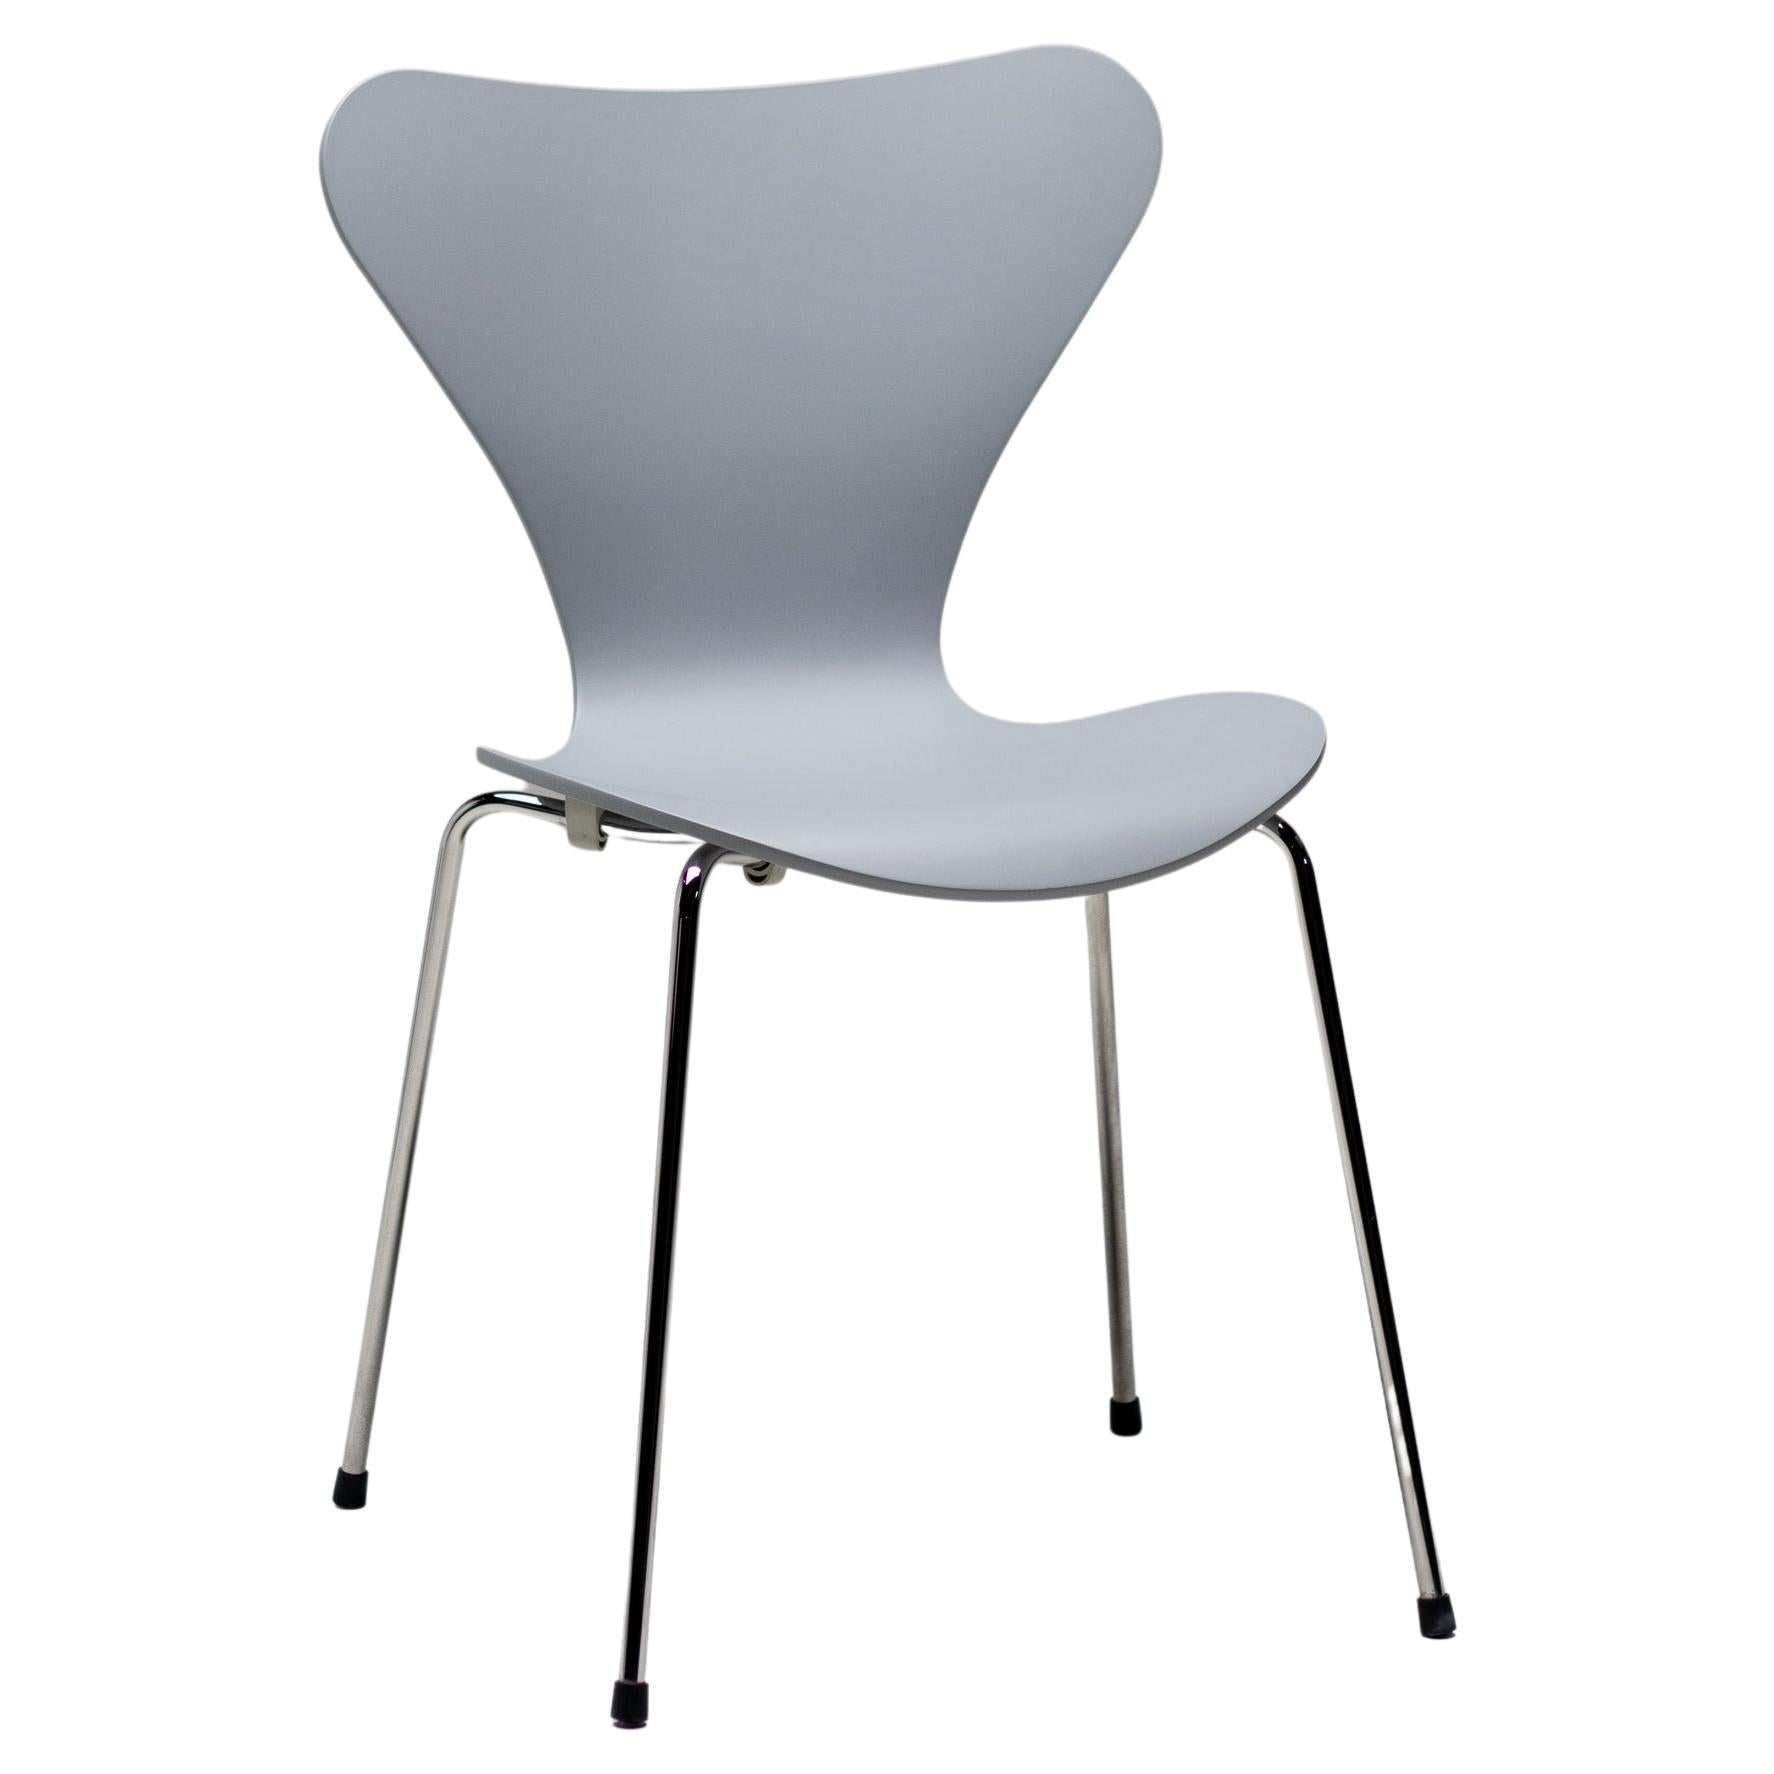 Maarten Baas Signed Limited Edition Arne Jacobsen Series 7 Chair For Sale